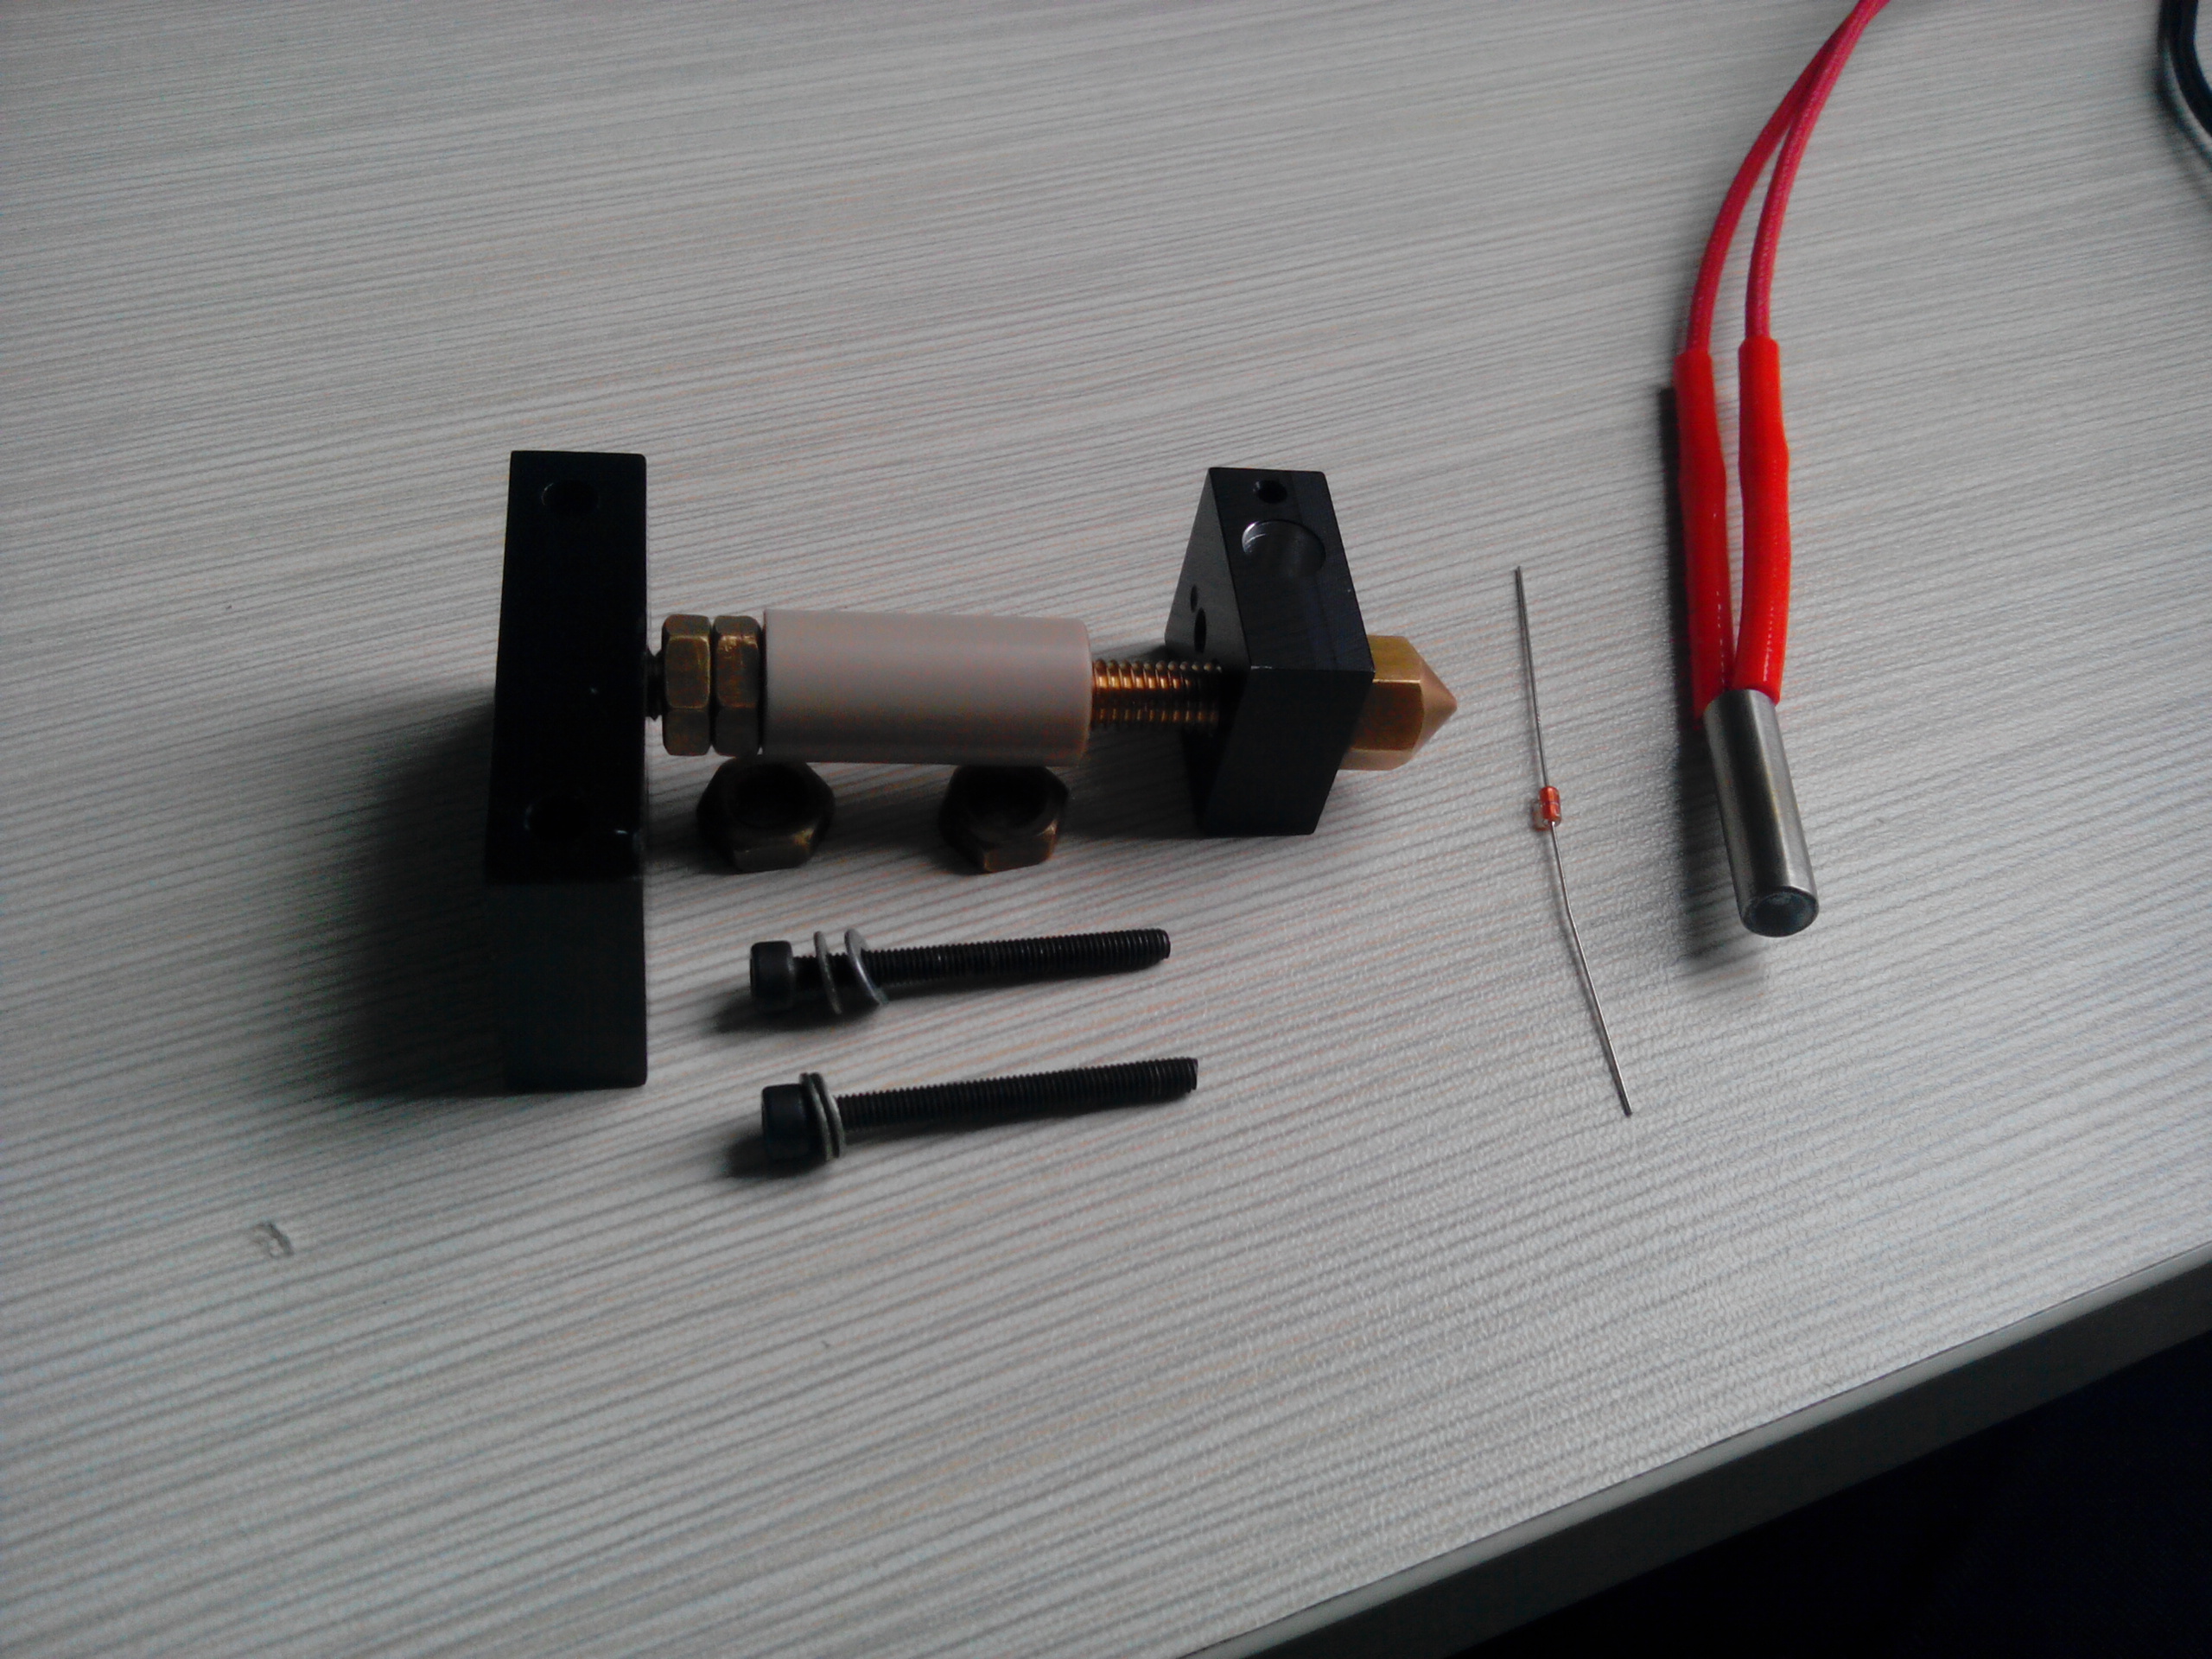 components of PiBot extruder